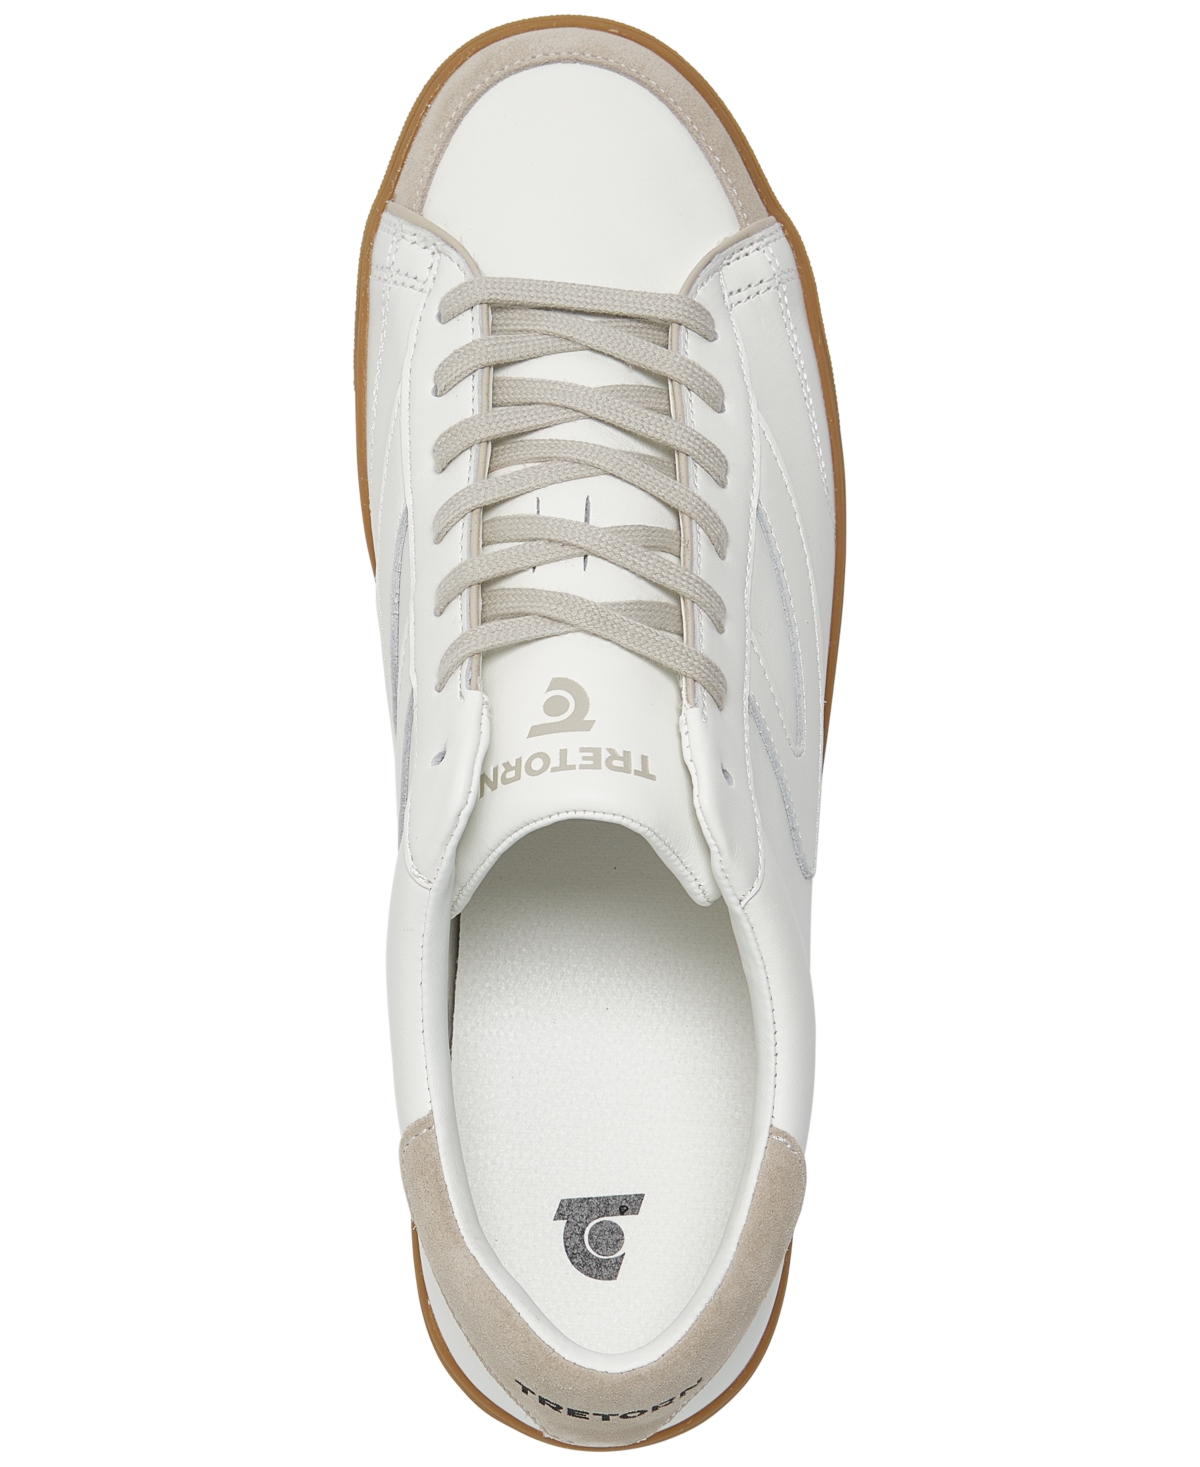 Shop Under Armour Men's Kick Serve Low Court Casual Sneakers From Finish Line In Bright White,gum